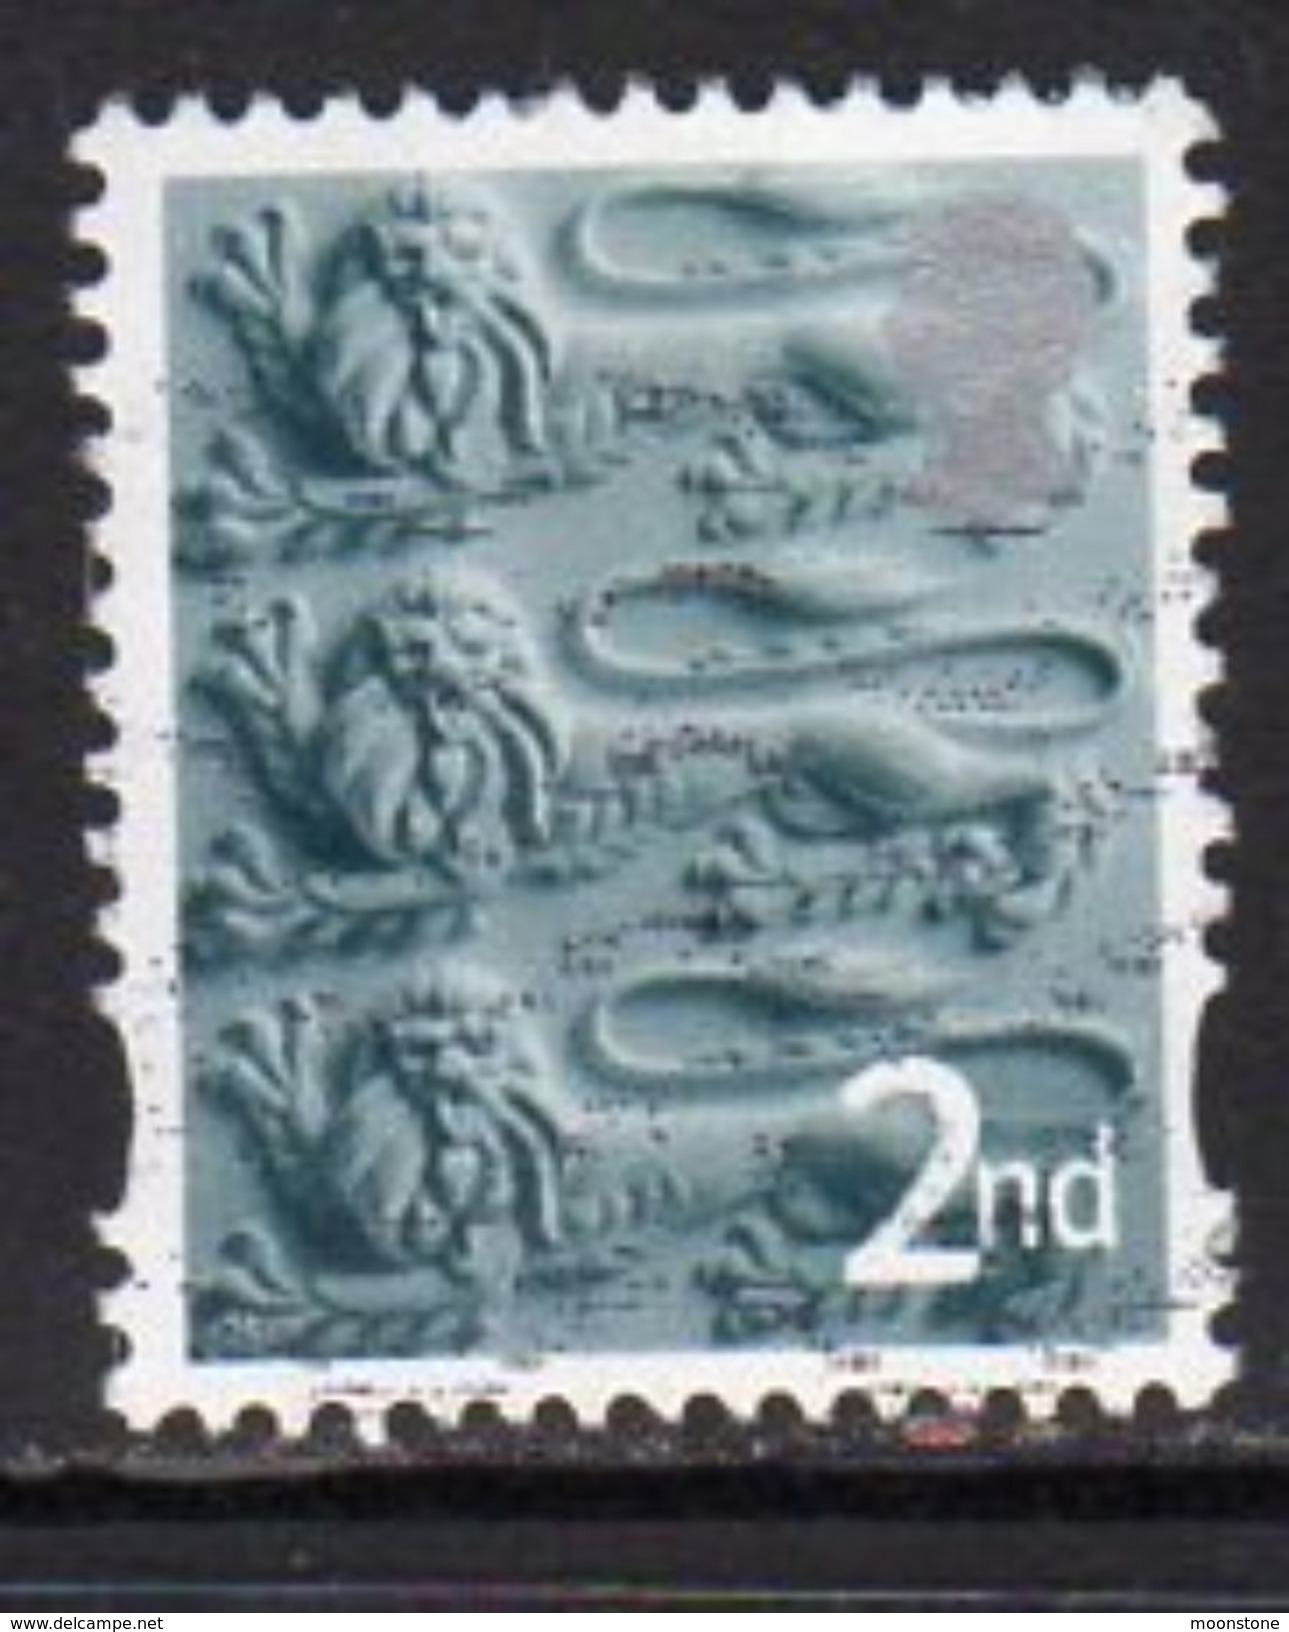 GB England 2001-2 2nd Class With Border Regional Country, Used, SG 6 - England